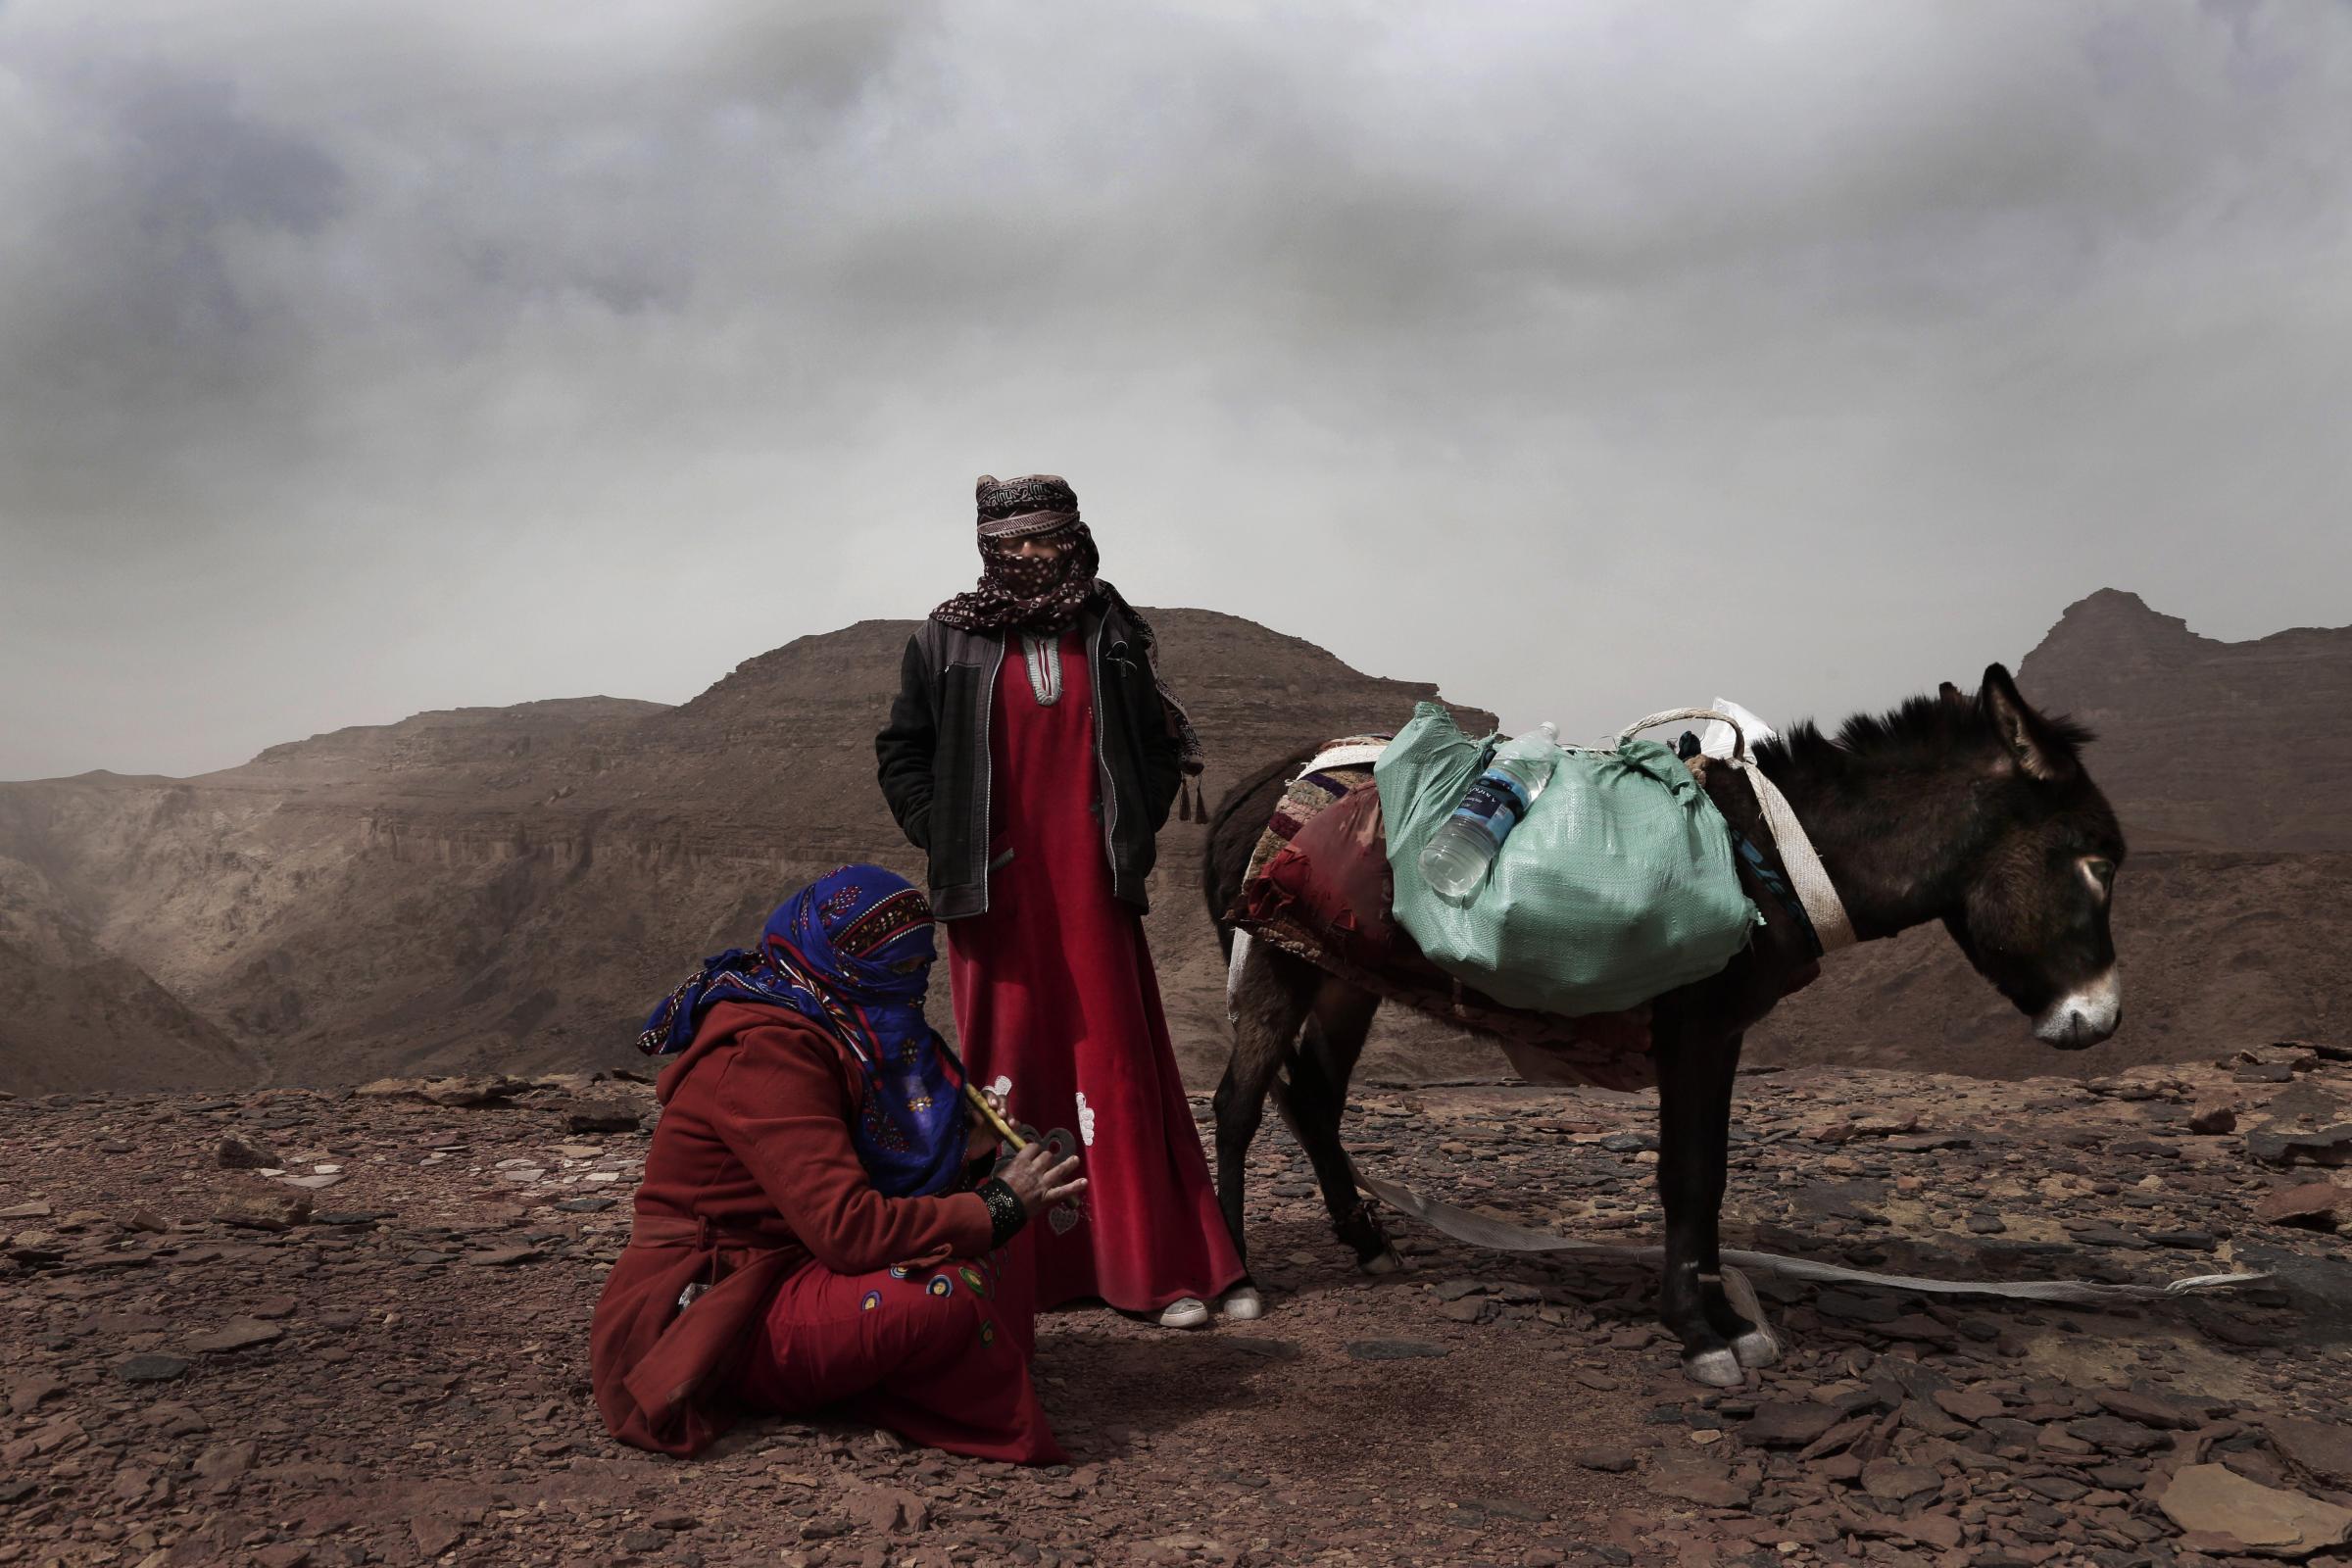 Umm Yasser, the first Bedouin female guide from the Hamada tribe, looks at Umm Soliman as she plays the flute, near Wadi Sahw, Abu Zenima, in South Sinai, Egypt on March 2019. Umm Yasser is breaking new ground among the deeply conservative Bedouin of Egypt&rsquo;s Sinai Peninsula. Women among the Bedouin almost never work outside the home, and even more rarely do they interact with outsiders. But Umm Yasser is one of four women from the community who for the first time are working as tour guides.